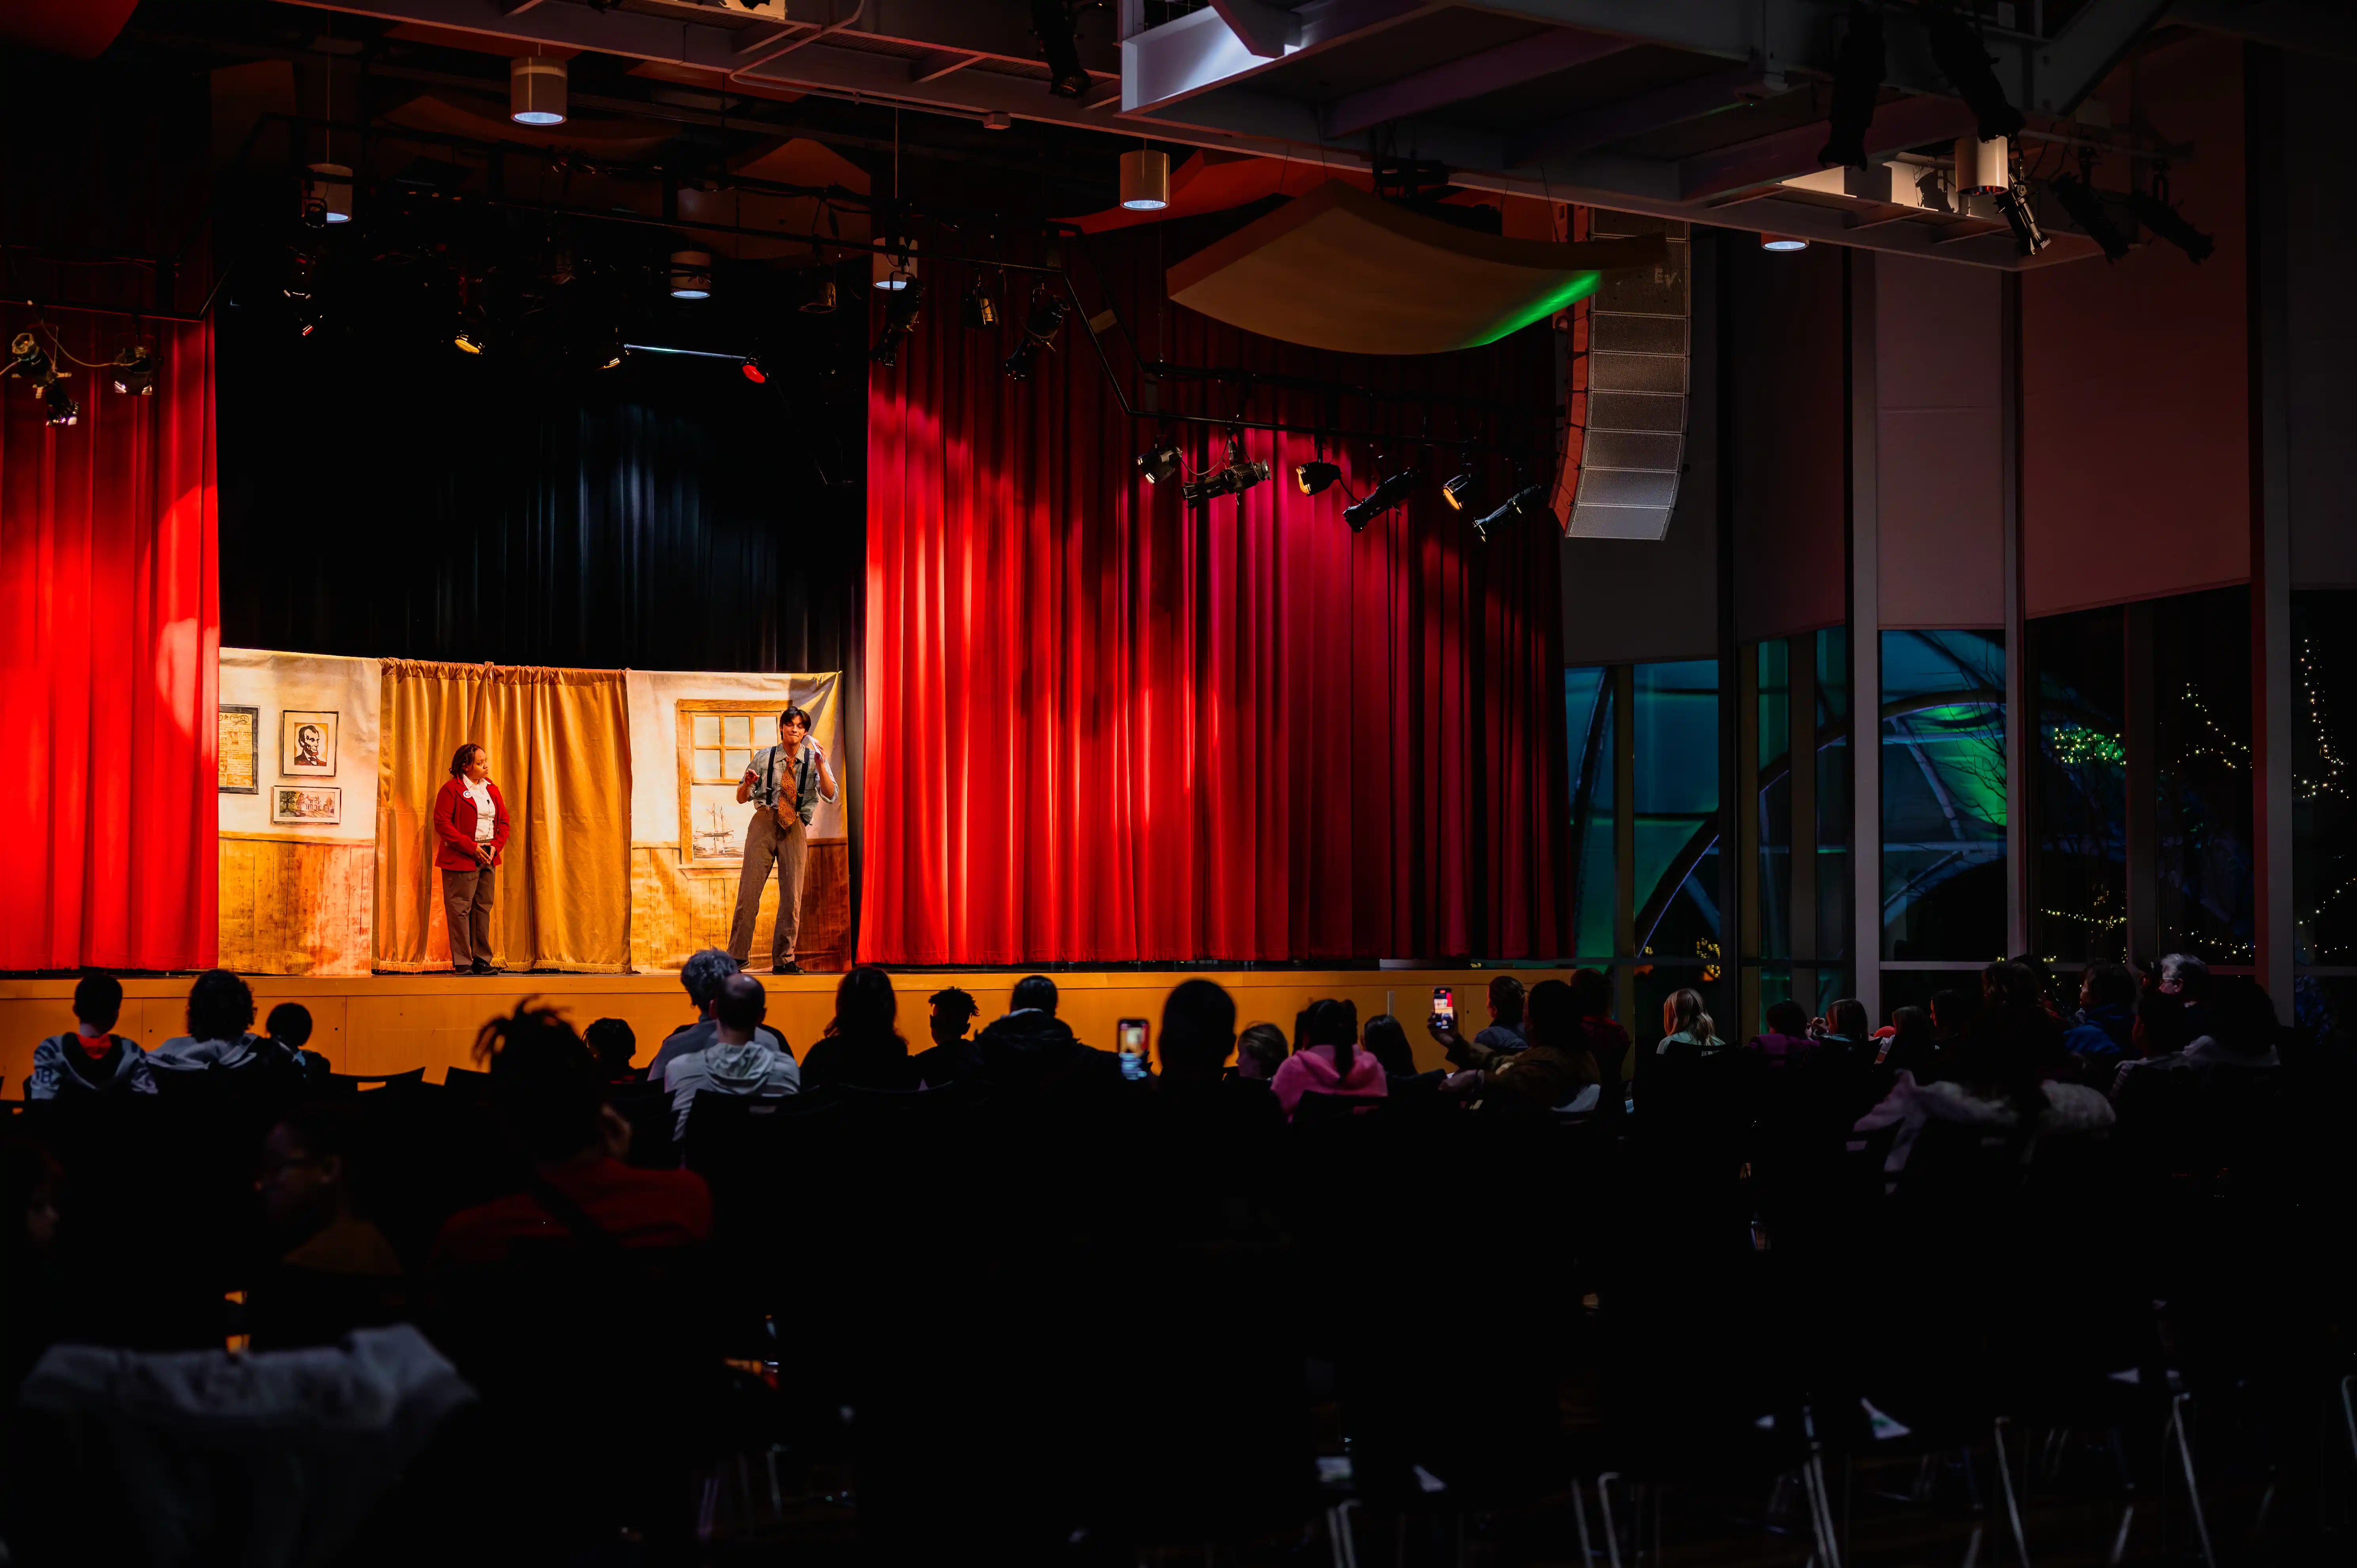 Audience viewing performers on a stage with red curtains at a dimly lit event.